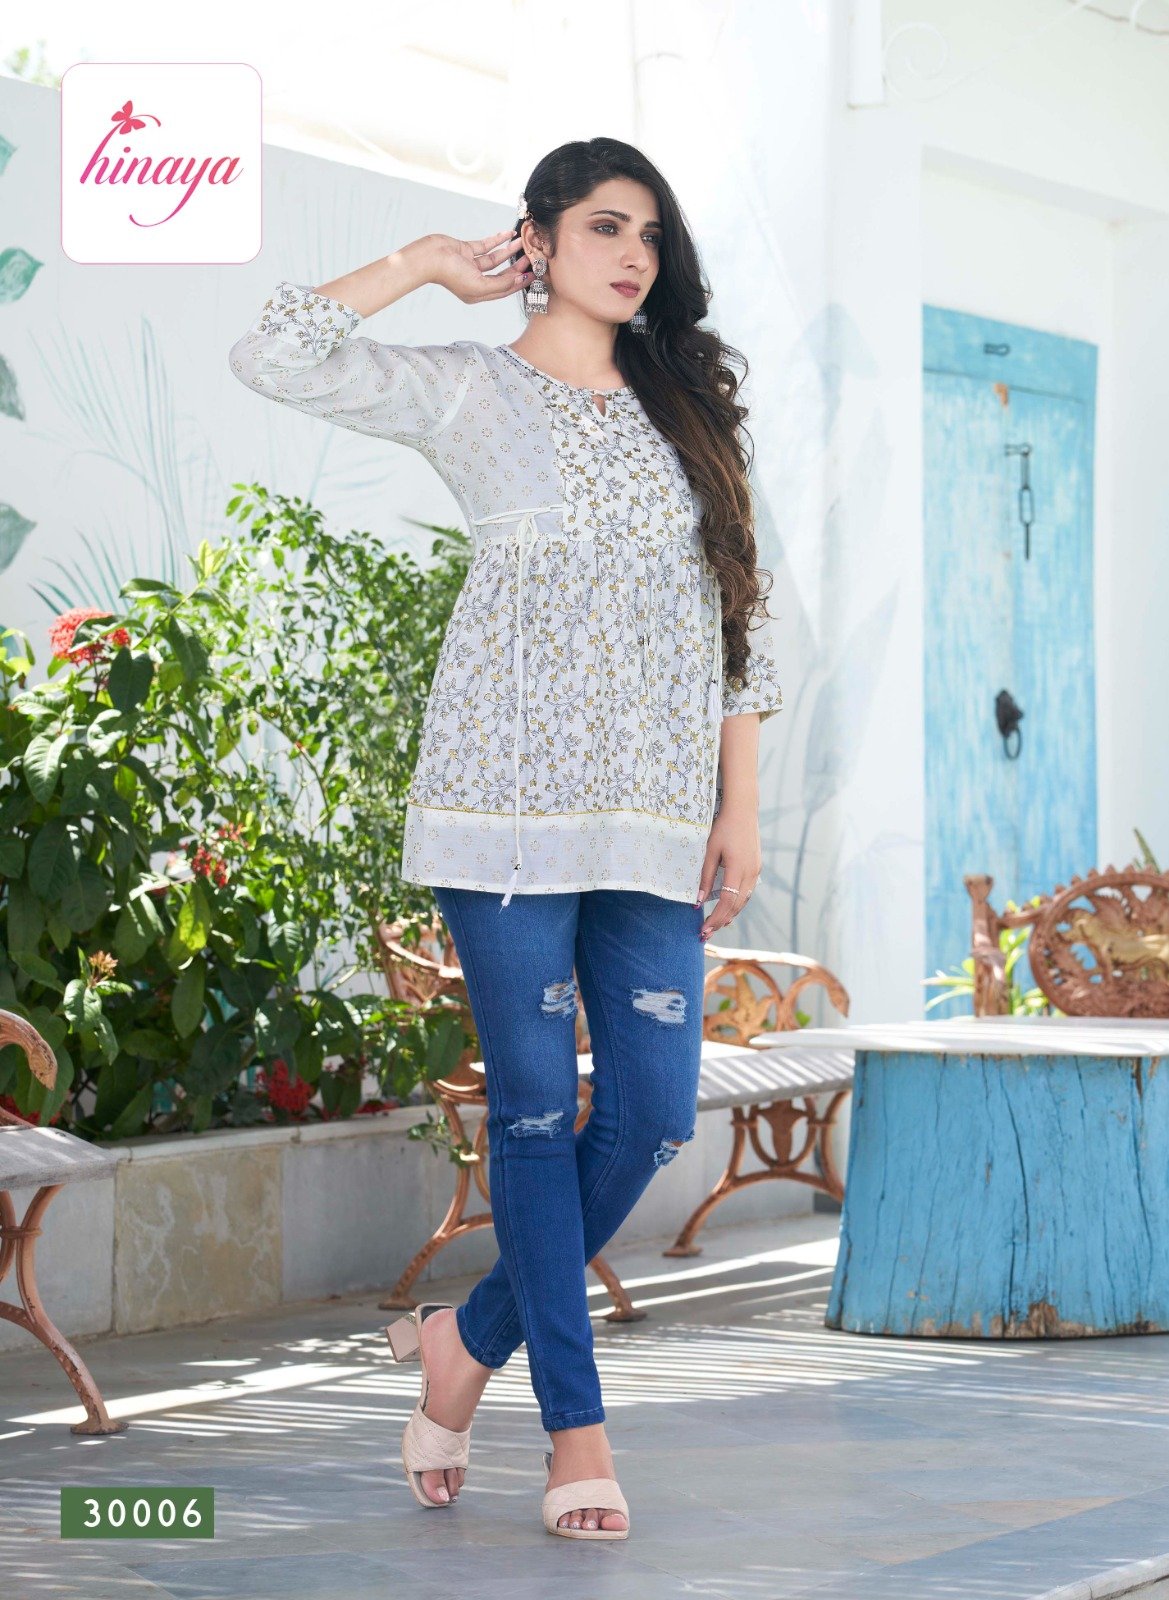 Turn Heads This Season With These Modern Kurtis For Jeans! Learn To Style  These Ravishing Kurtis